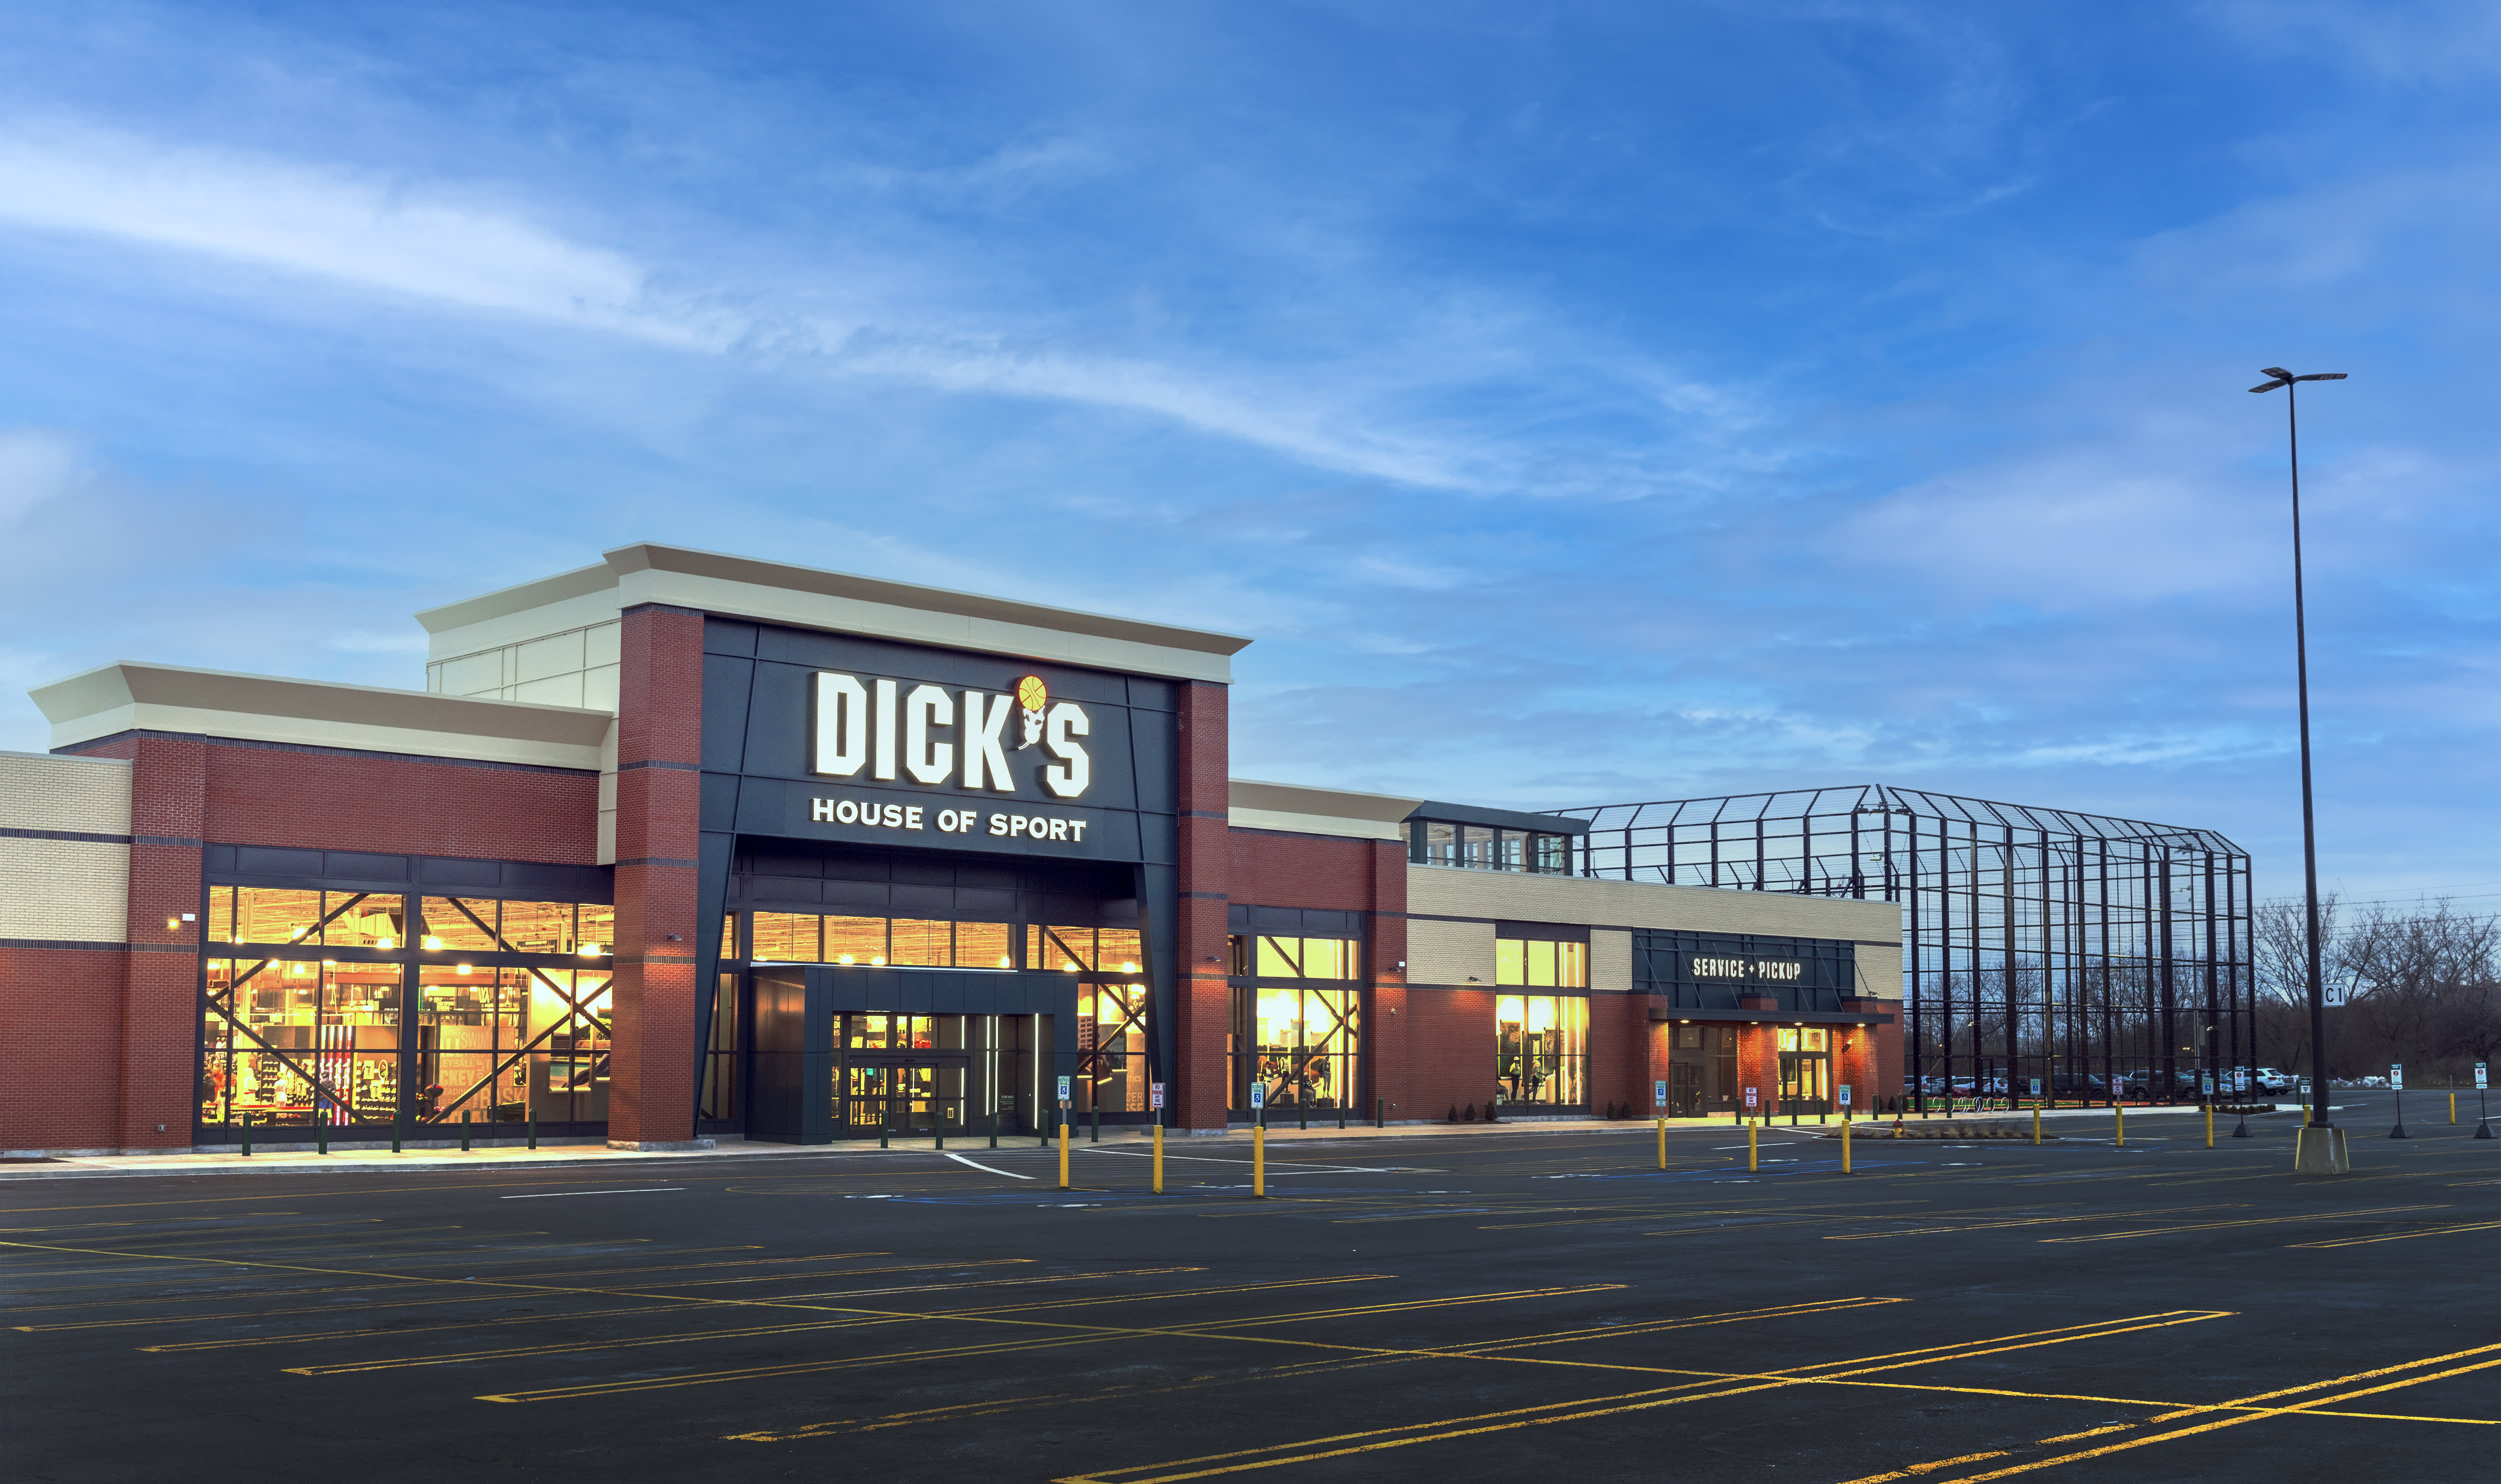 Dick’s Sporting Goods’ new store has a driveway and off-track